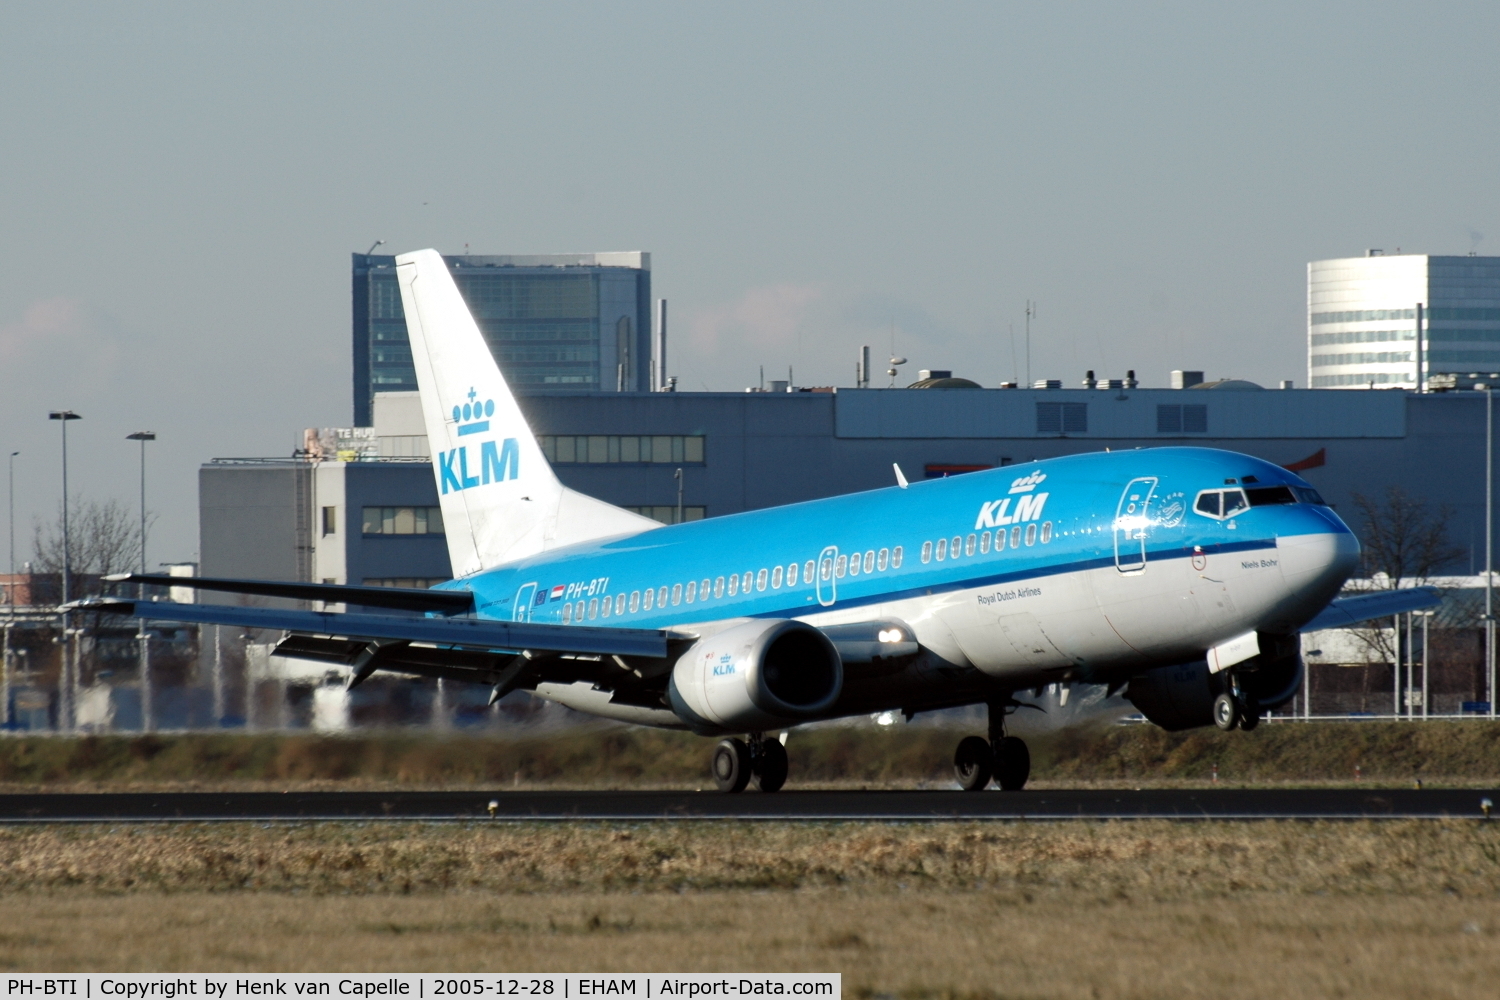 PH-BTI, 1997 Boeing 737-306 C/N 28720, KLM Boeing 737-300 just after touch down at Amsterdam Schiphol airport, the Netherlands.